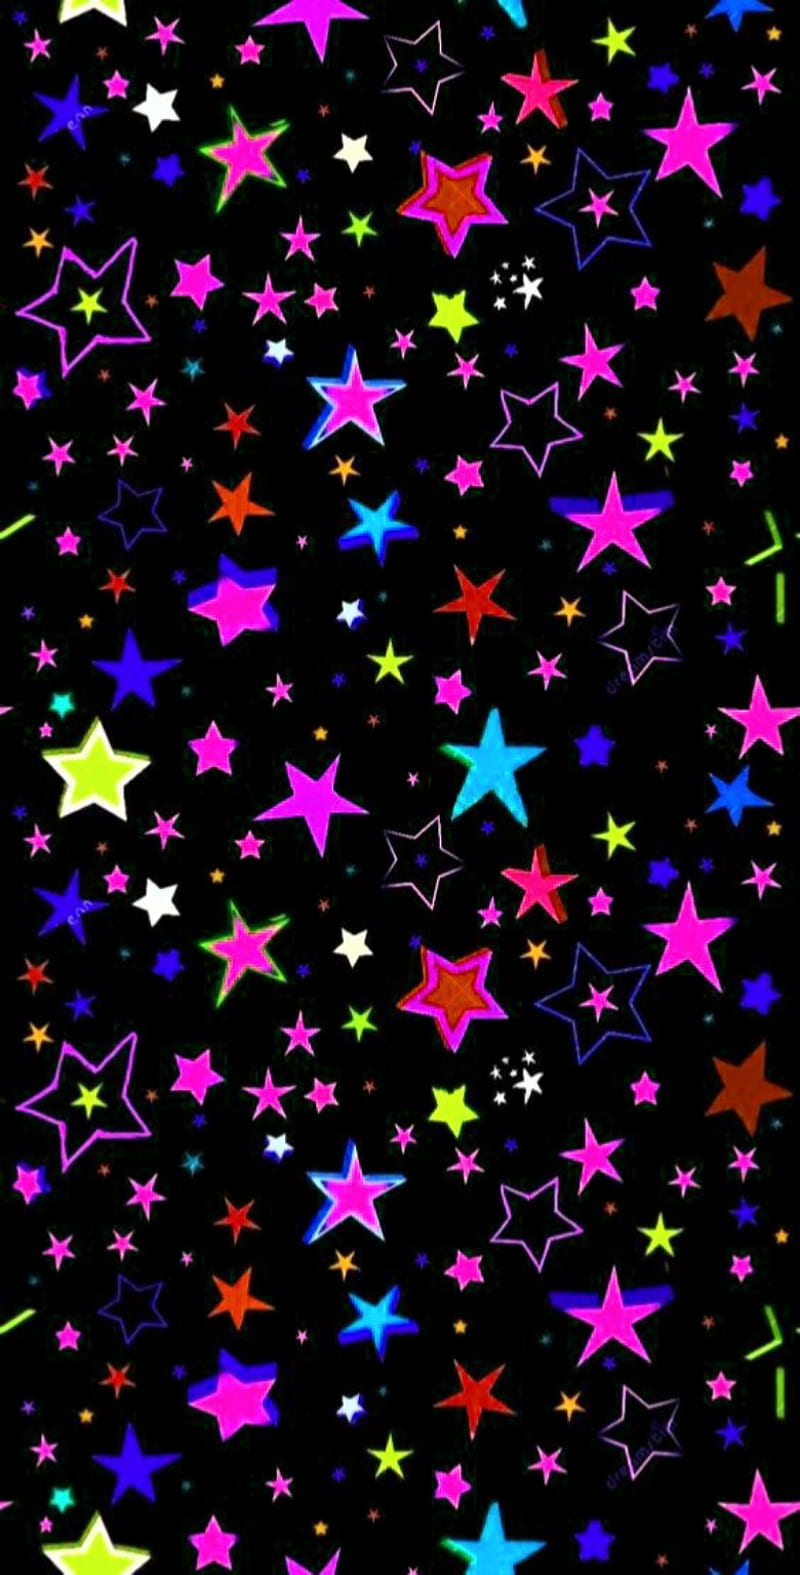 black background with colorful stars